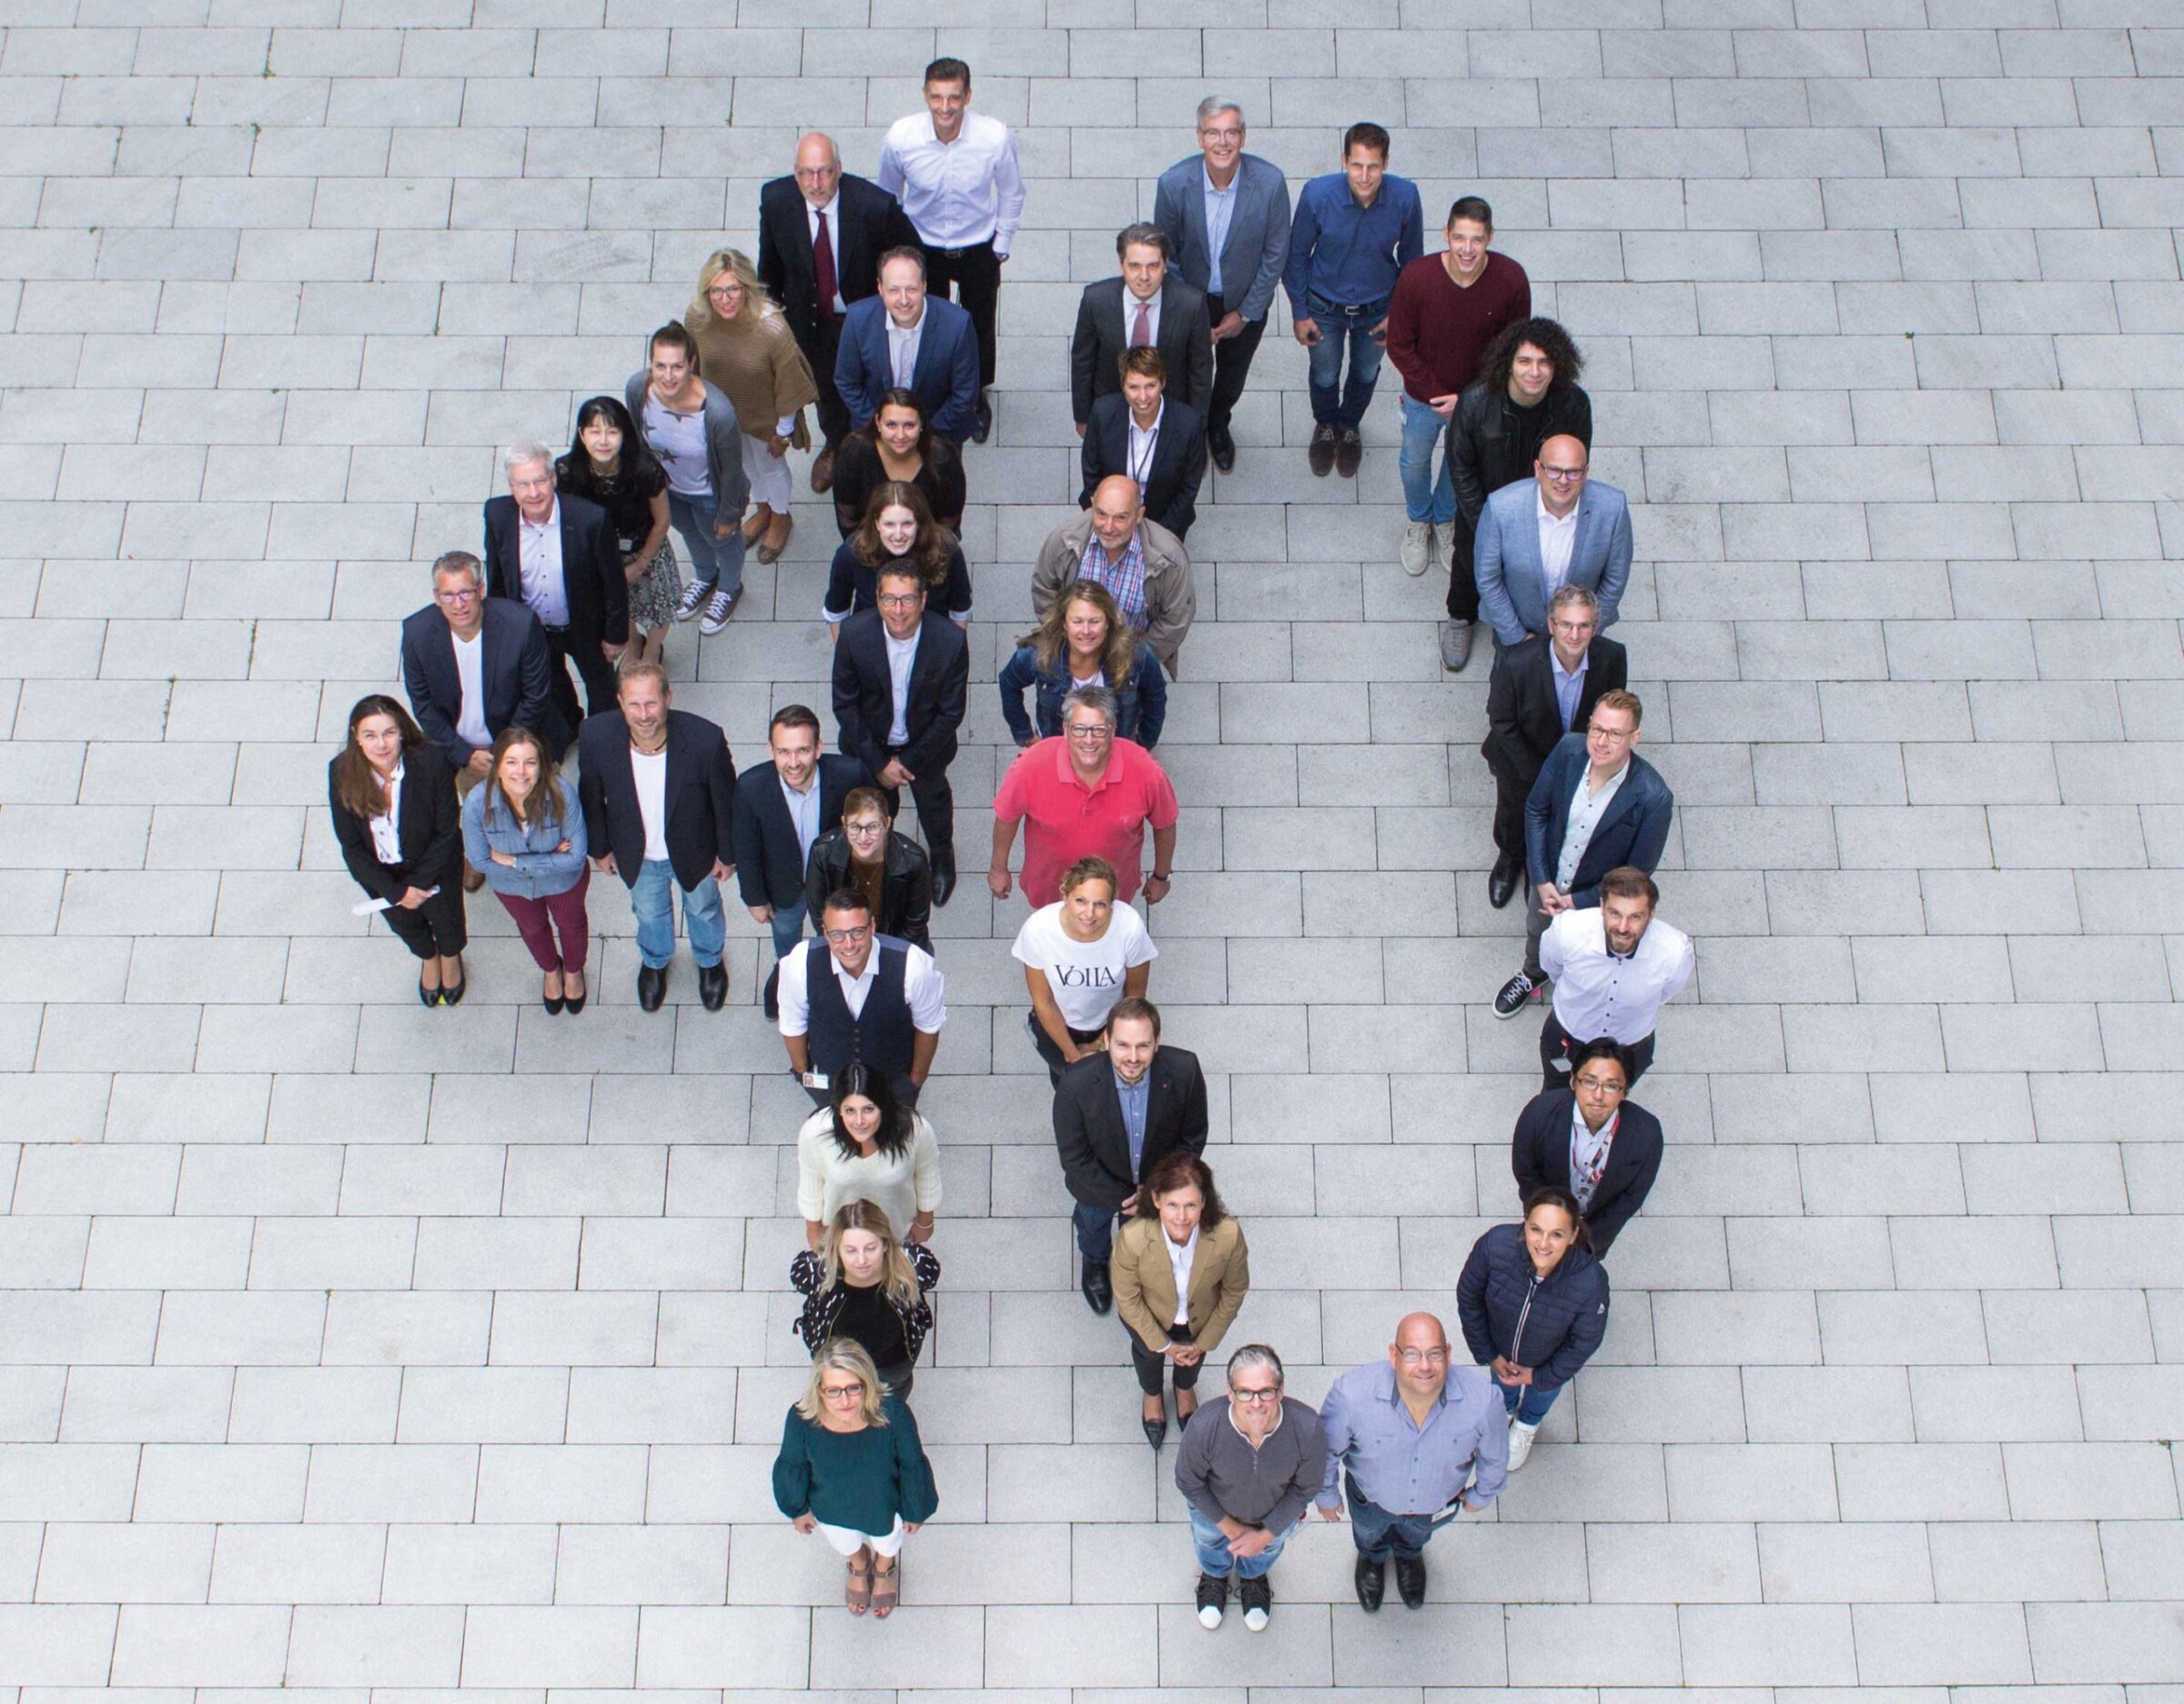 40 employees of Mitsubishi Electric’s German branch making the key visual for the company’s 40th anniversary.